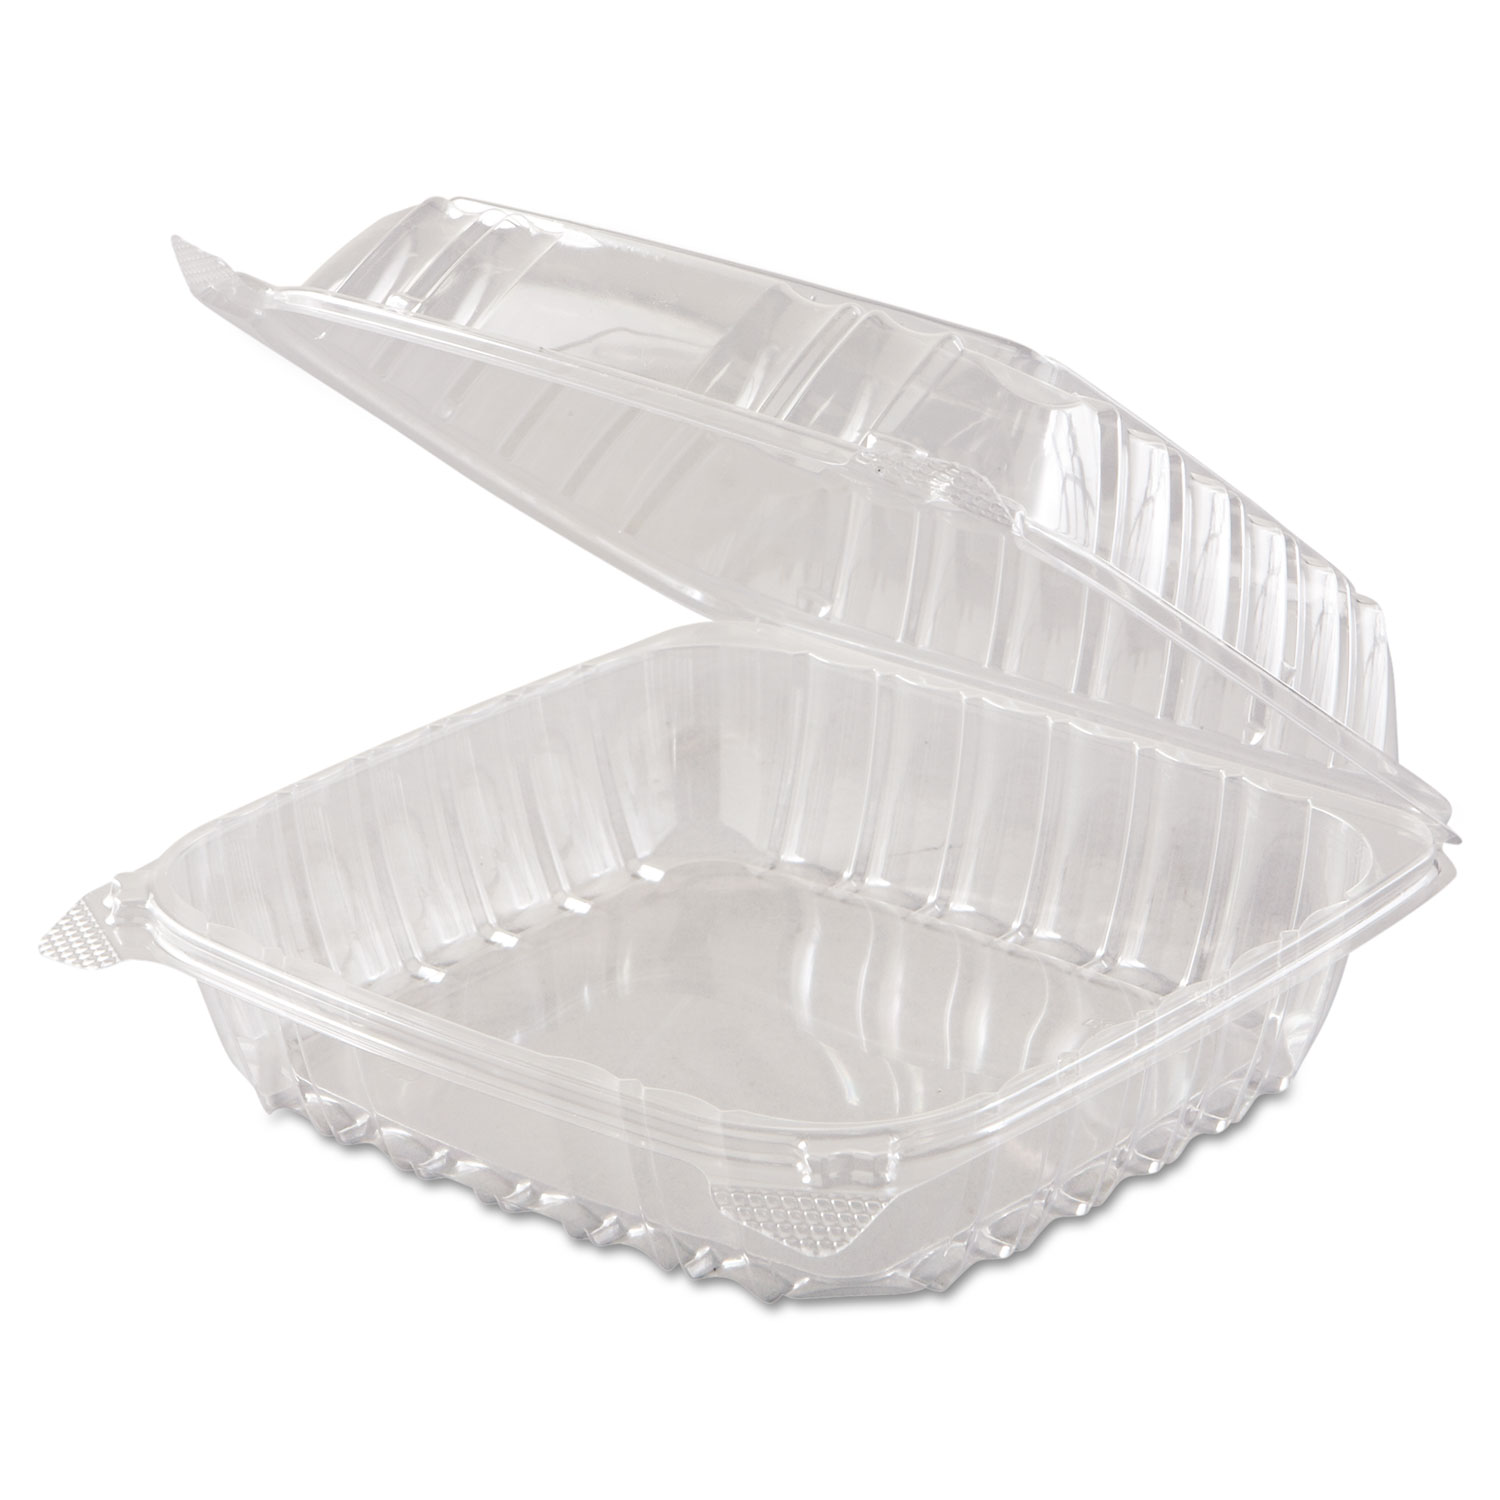 ClearSeal Hinged-Lid Plastic Containers, 8 3/10 x 8 3/10 x 3, Clear, 250/Carton